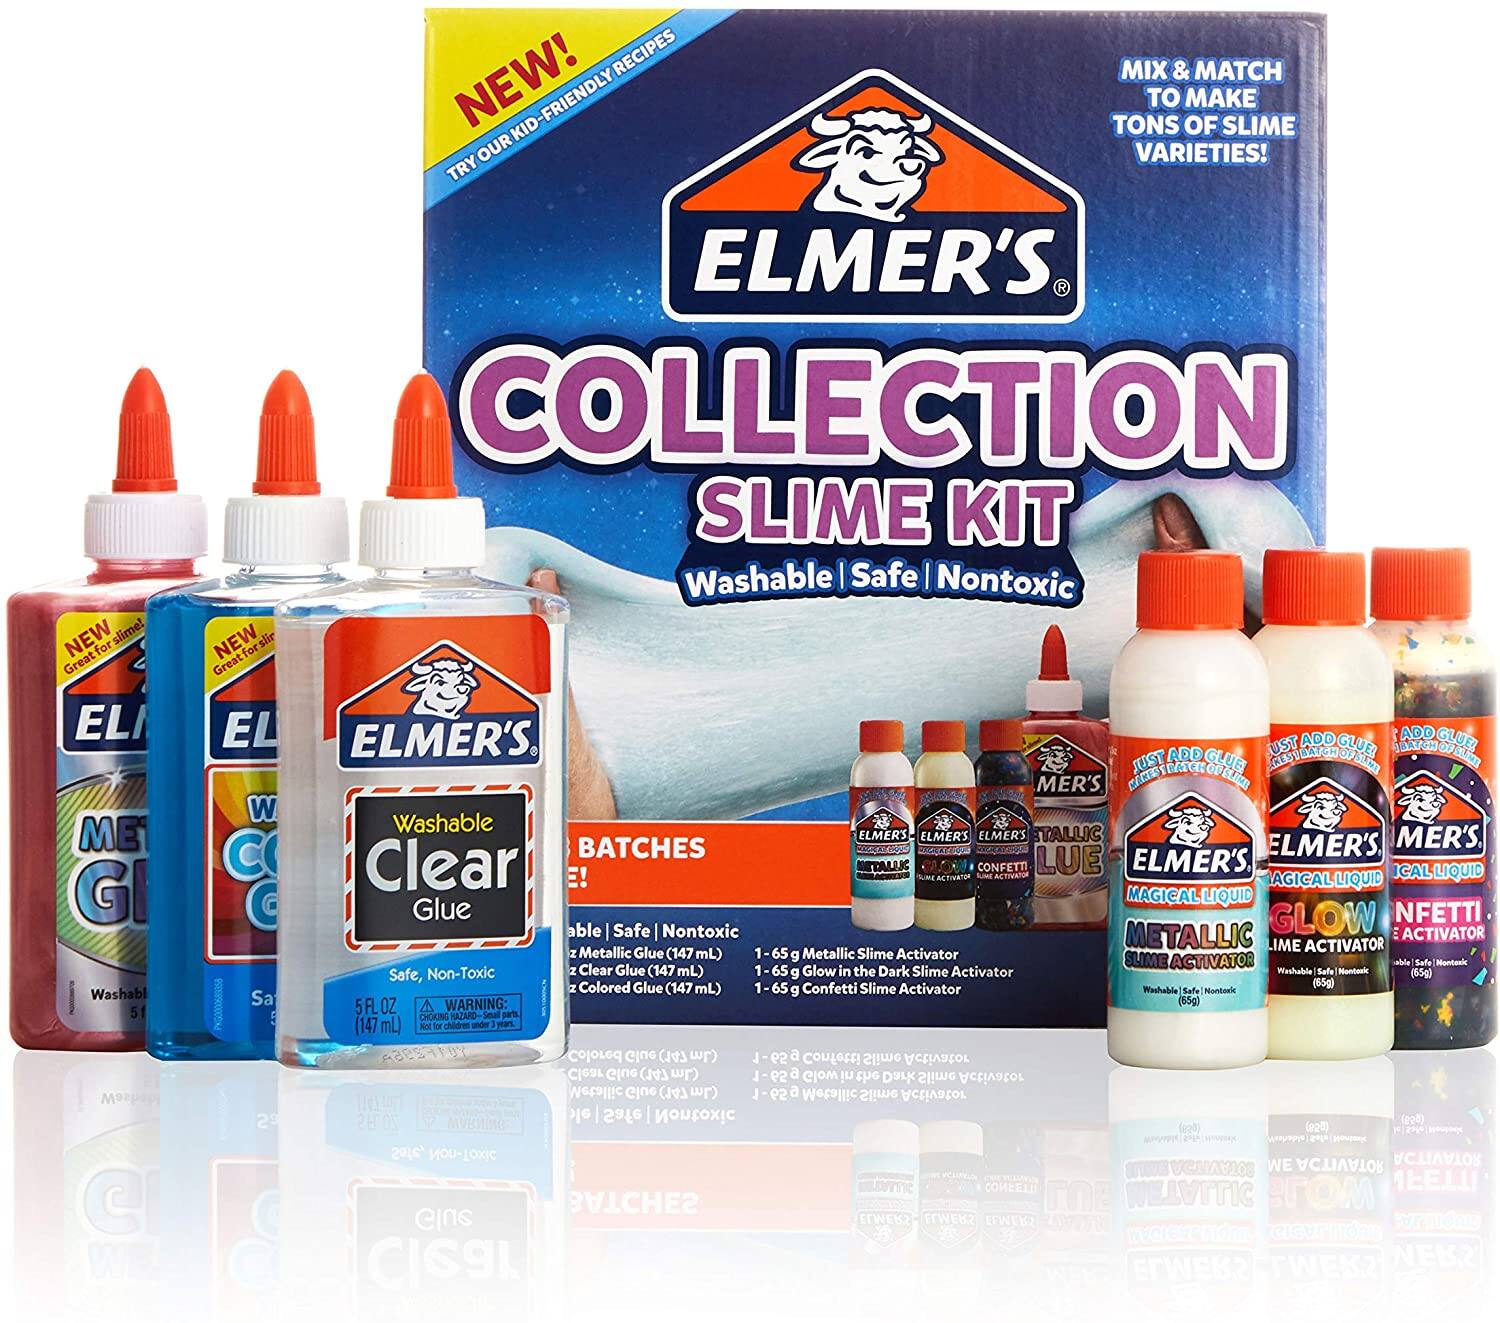 6-Piece Elmer's Collection Slime Kit Supplies (Glow In The Dark Slime Activator, Metallic Magical Liquid, Confetti Magical Liquid, More) $7.12 + free shipping w/ Prime or on $25+